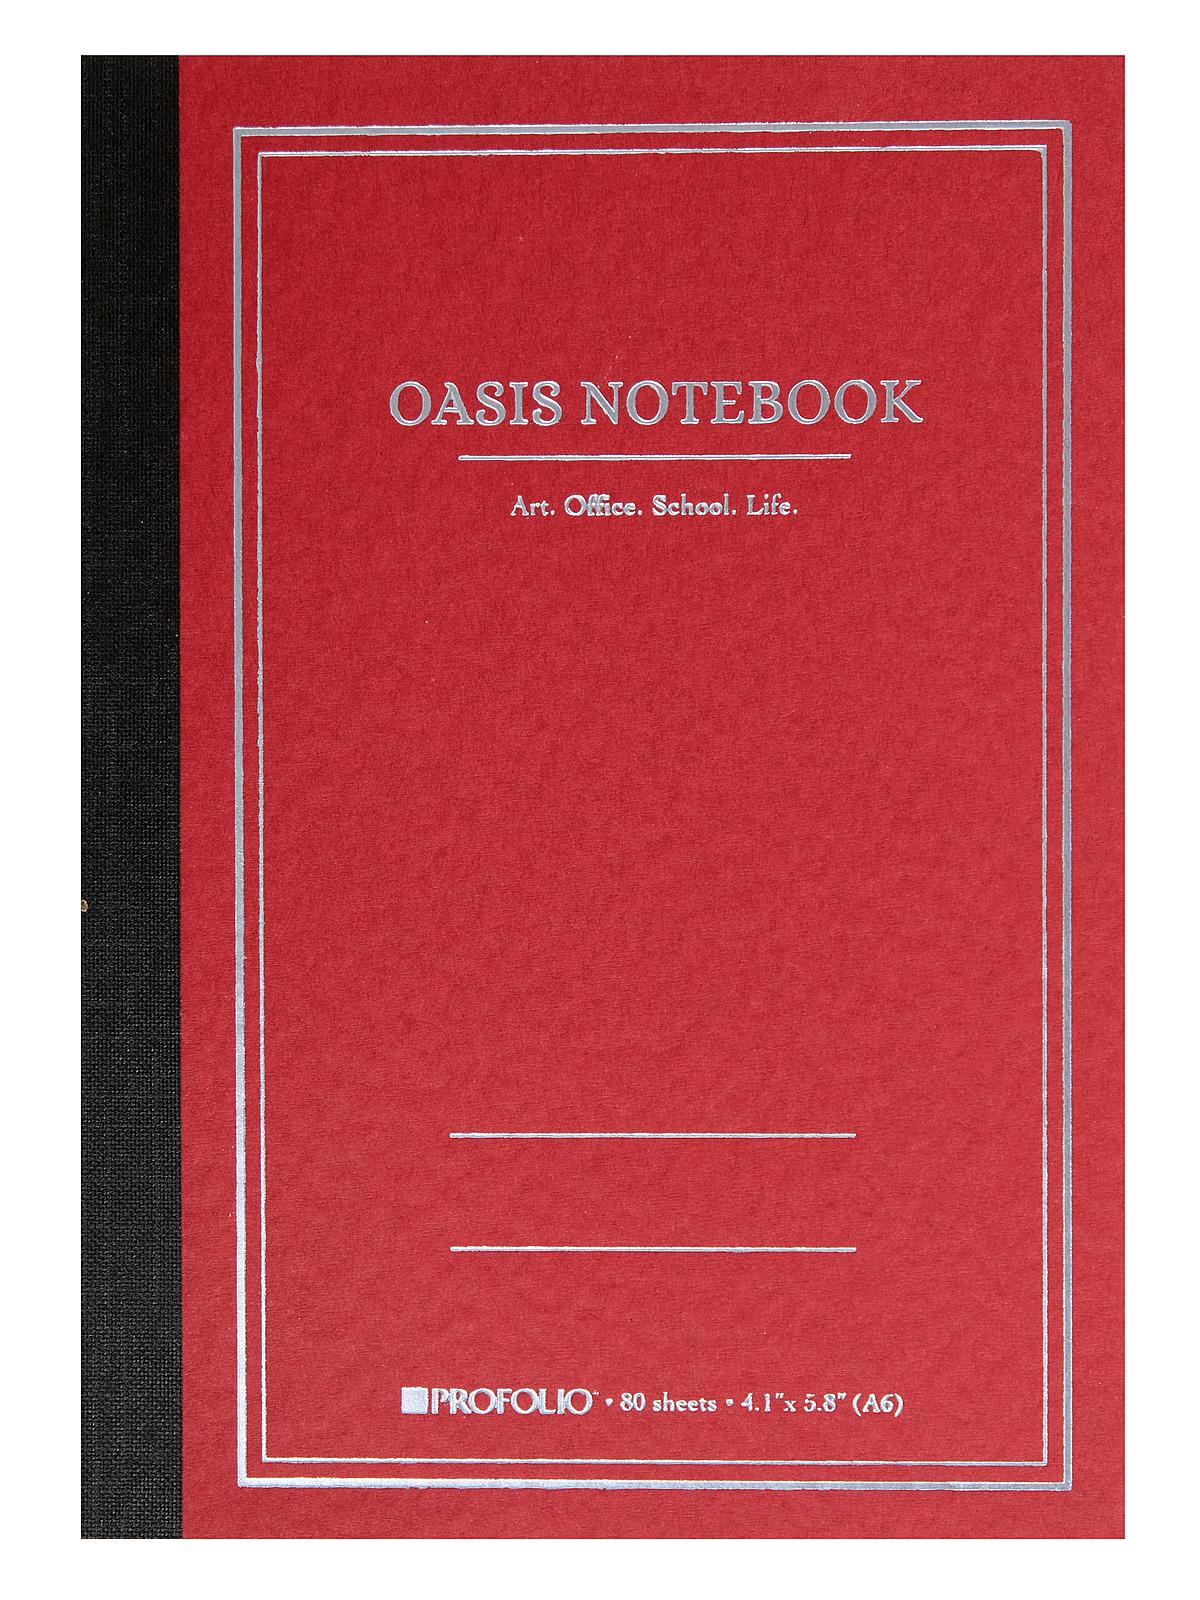 Profolio Oasis Notebook A6 4.1 In. X 5.8 In. Brick 80 Sheets